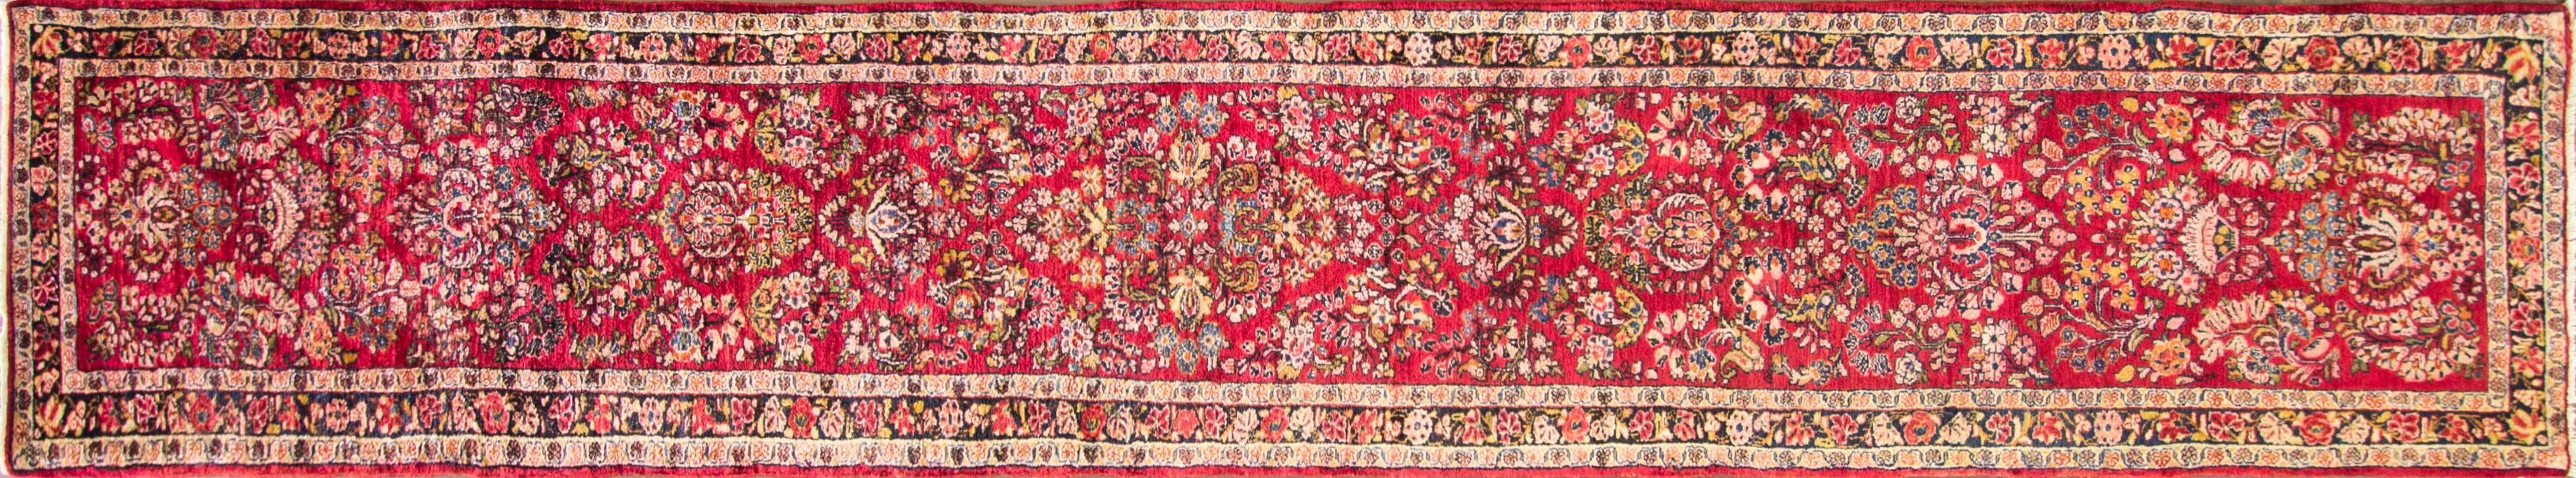 Sarouks also called Sarouks are double-wefted, heavier carpets with a higher knot count than rug from the village of Sultanabad. Fields are often blue or ivory and designs typically feature either large medallions or representations of trees and